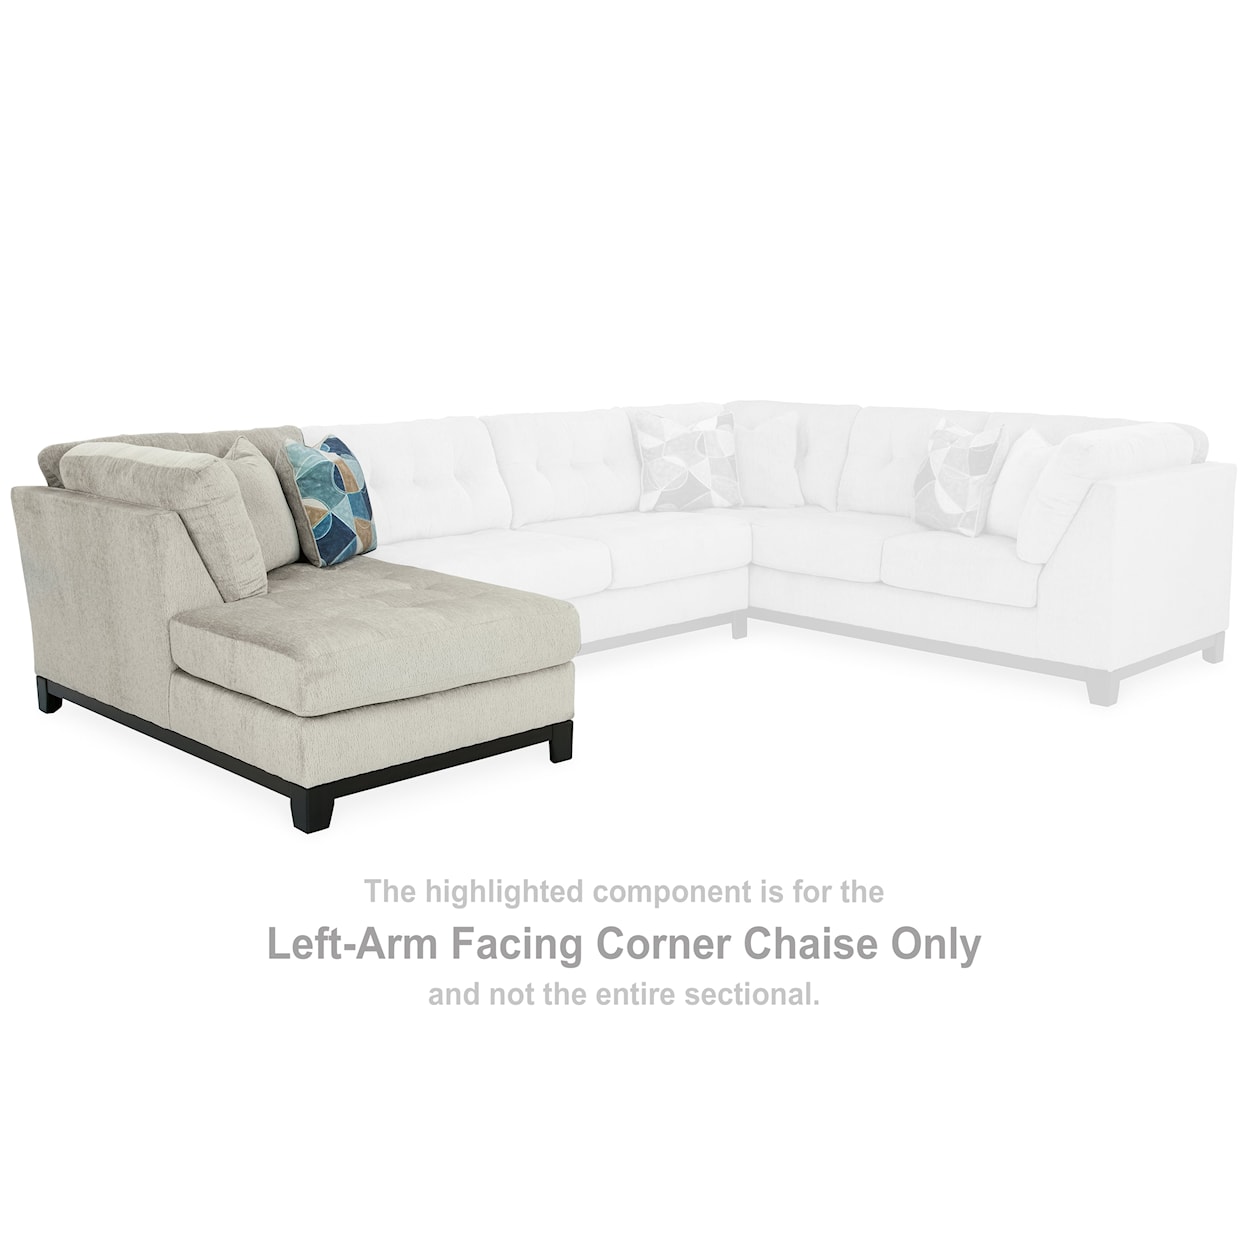 Benchcraft Maxon Place LAF Corner Chaise